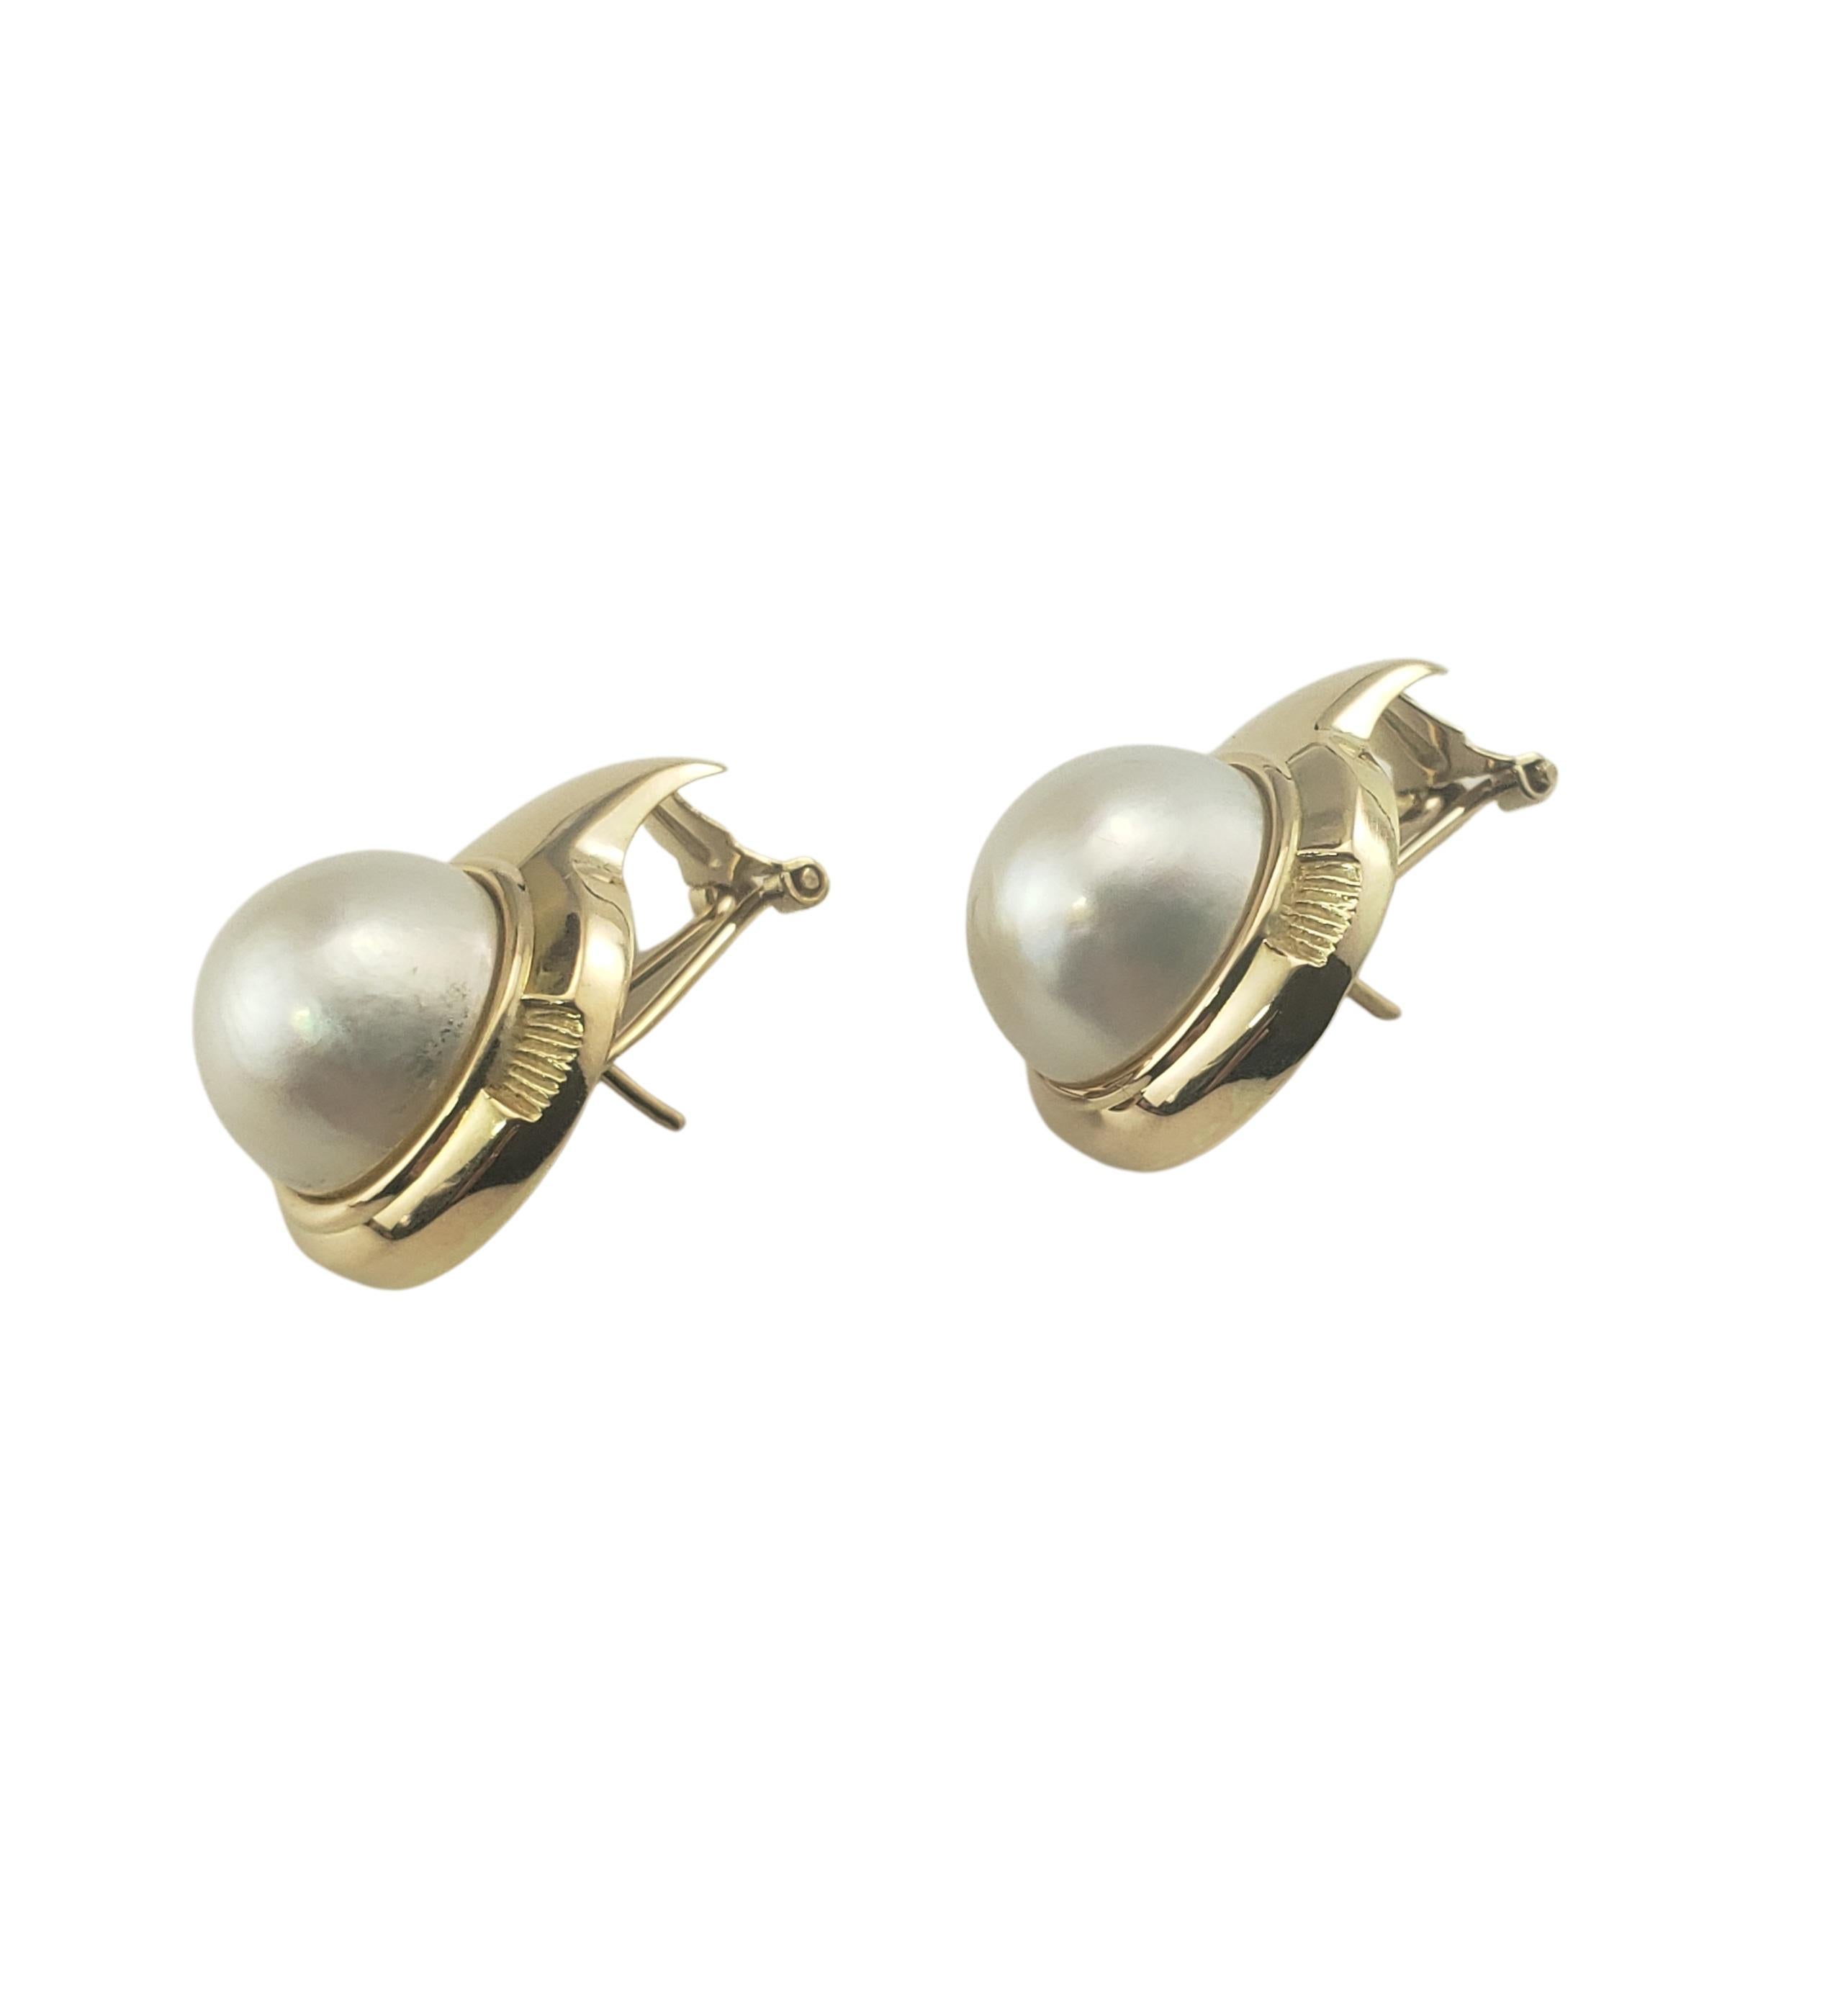 14 Karat Yellow Gold and Mabe Pearl Earrings-

These elegant earrings each features one Mabe pearl (12 mm) set in classic 14K yellow gold.  Hinged closures.

Size: 23 mm x 18 mm

Weight:  4.3 dwt. /  6.7 gr.

Stamped: 14K

Very good condition,